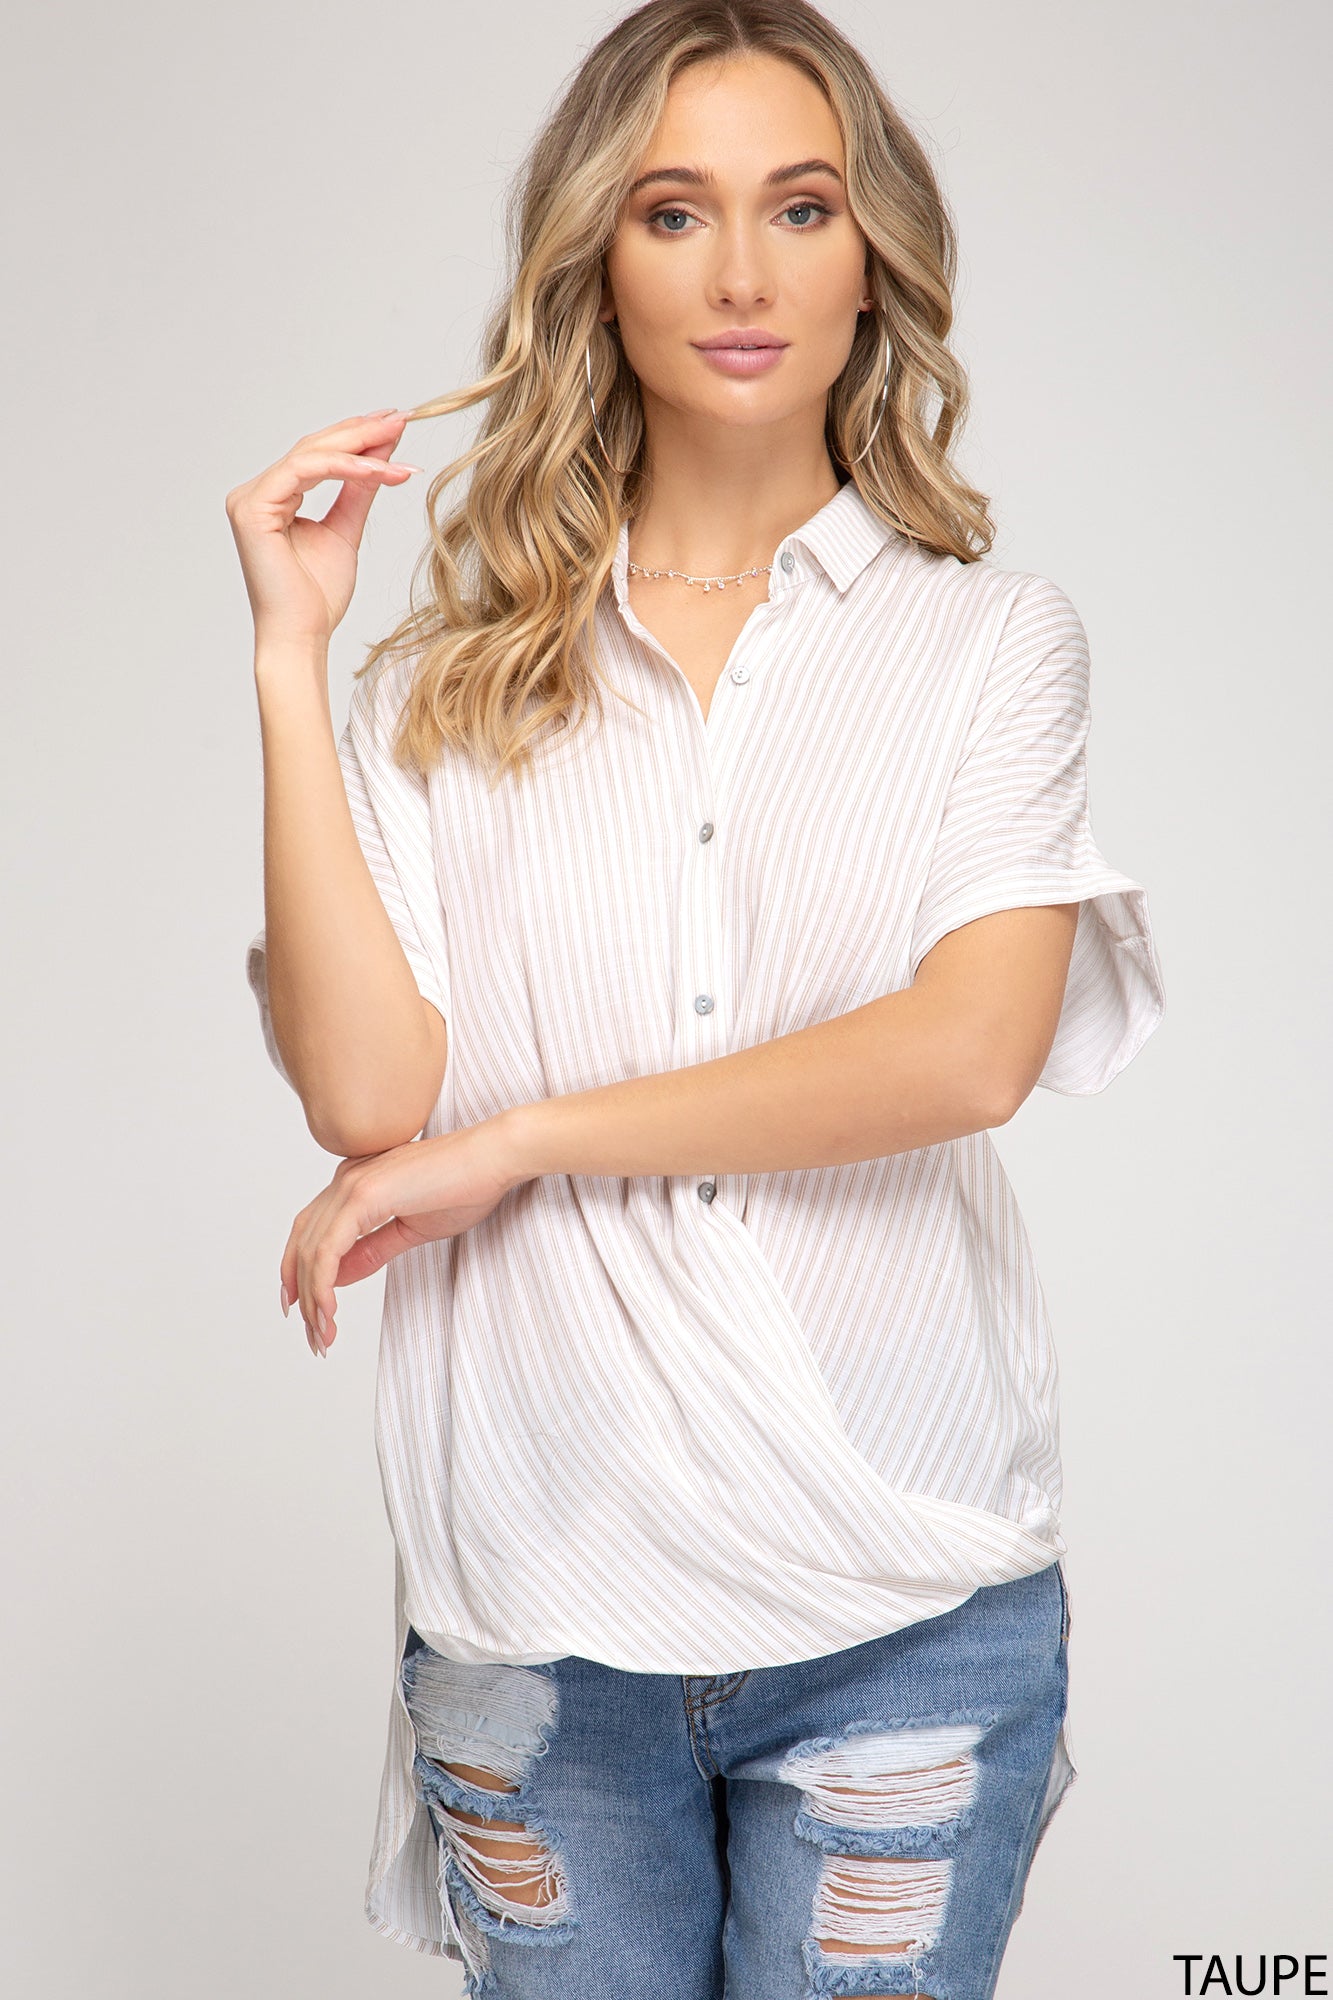 Woven Striped Top With Button Down Detail!